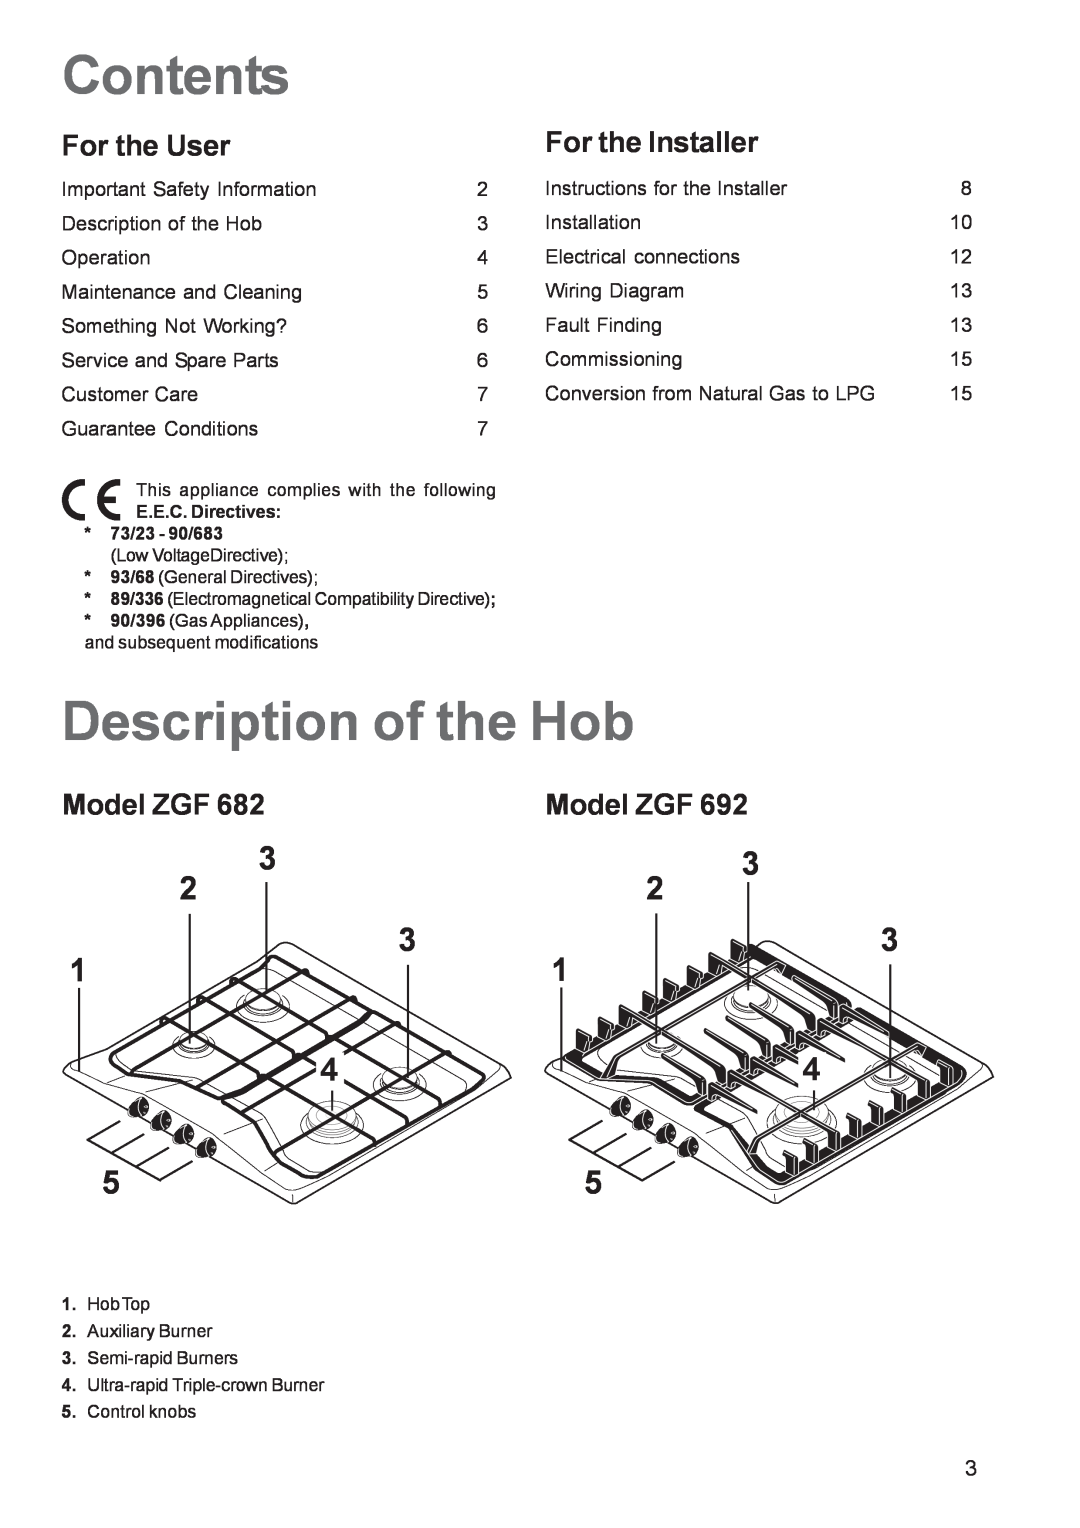 Zanussi ZGF 682, ZGF 692 manual Contents, Description of the Hob, For the User, For the Installer, Model ZGF 